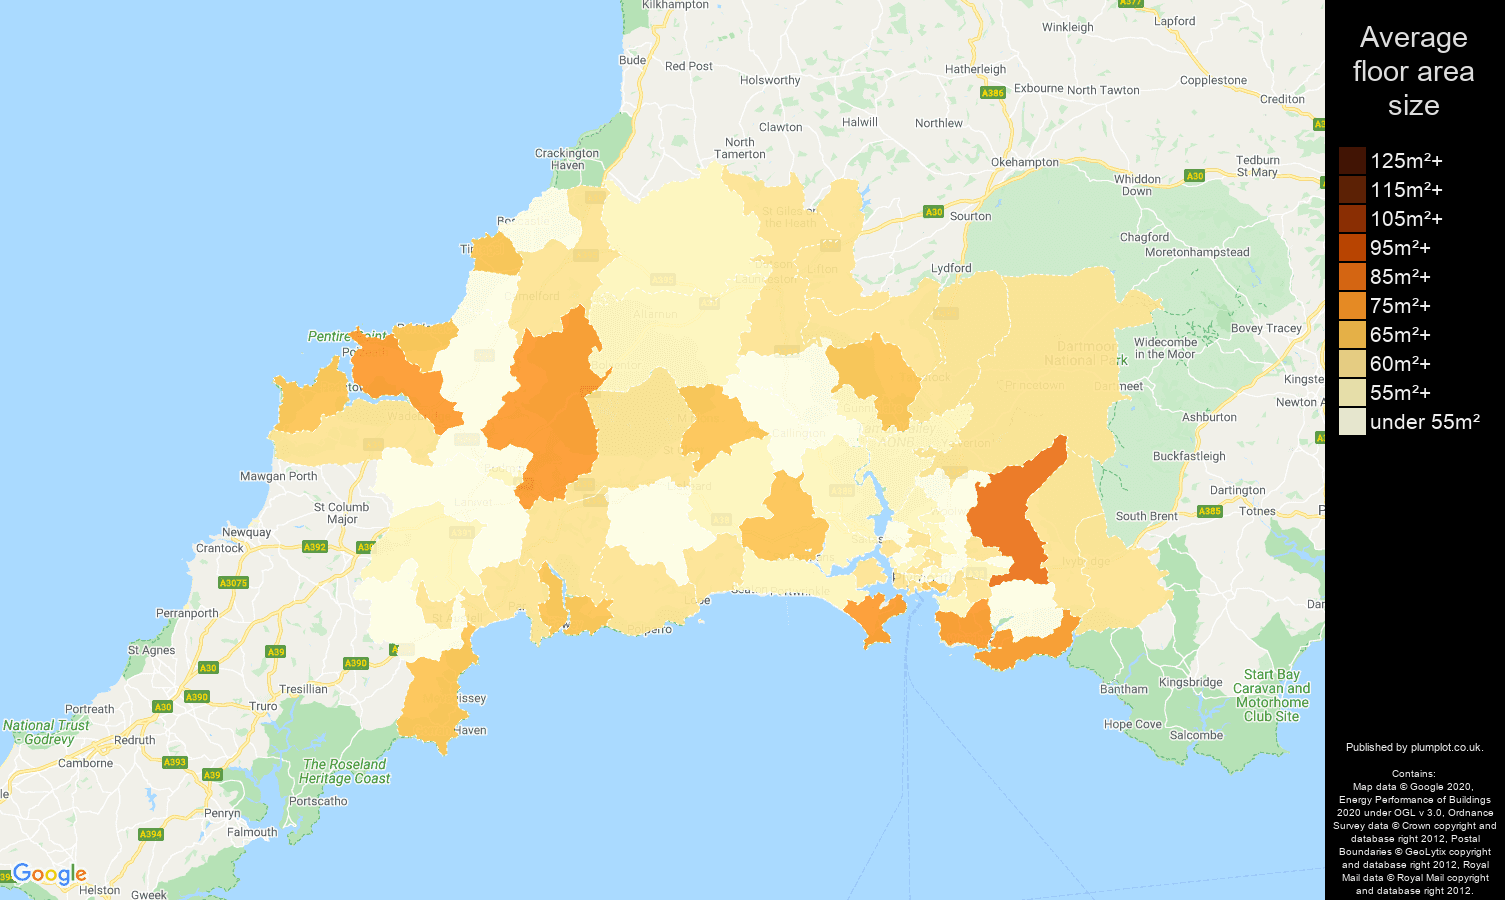 Plymouth map of average floor area size of flats